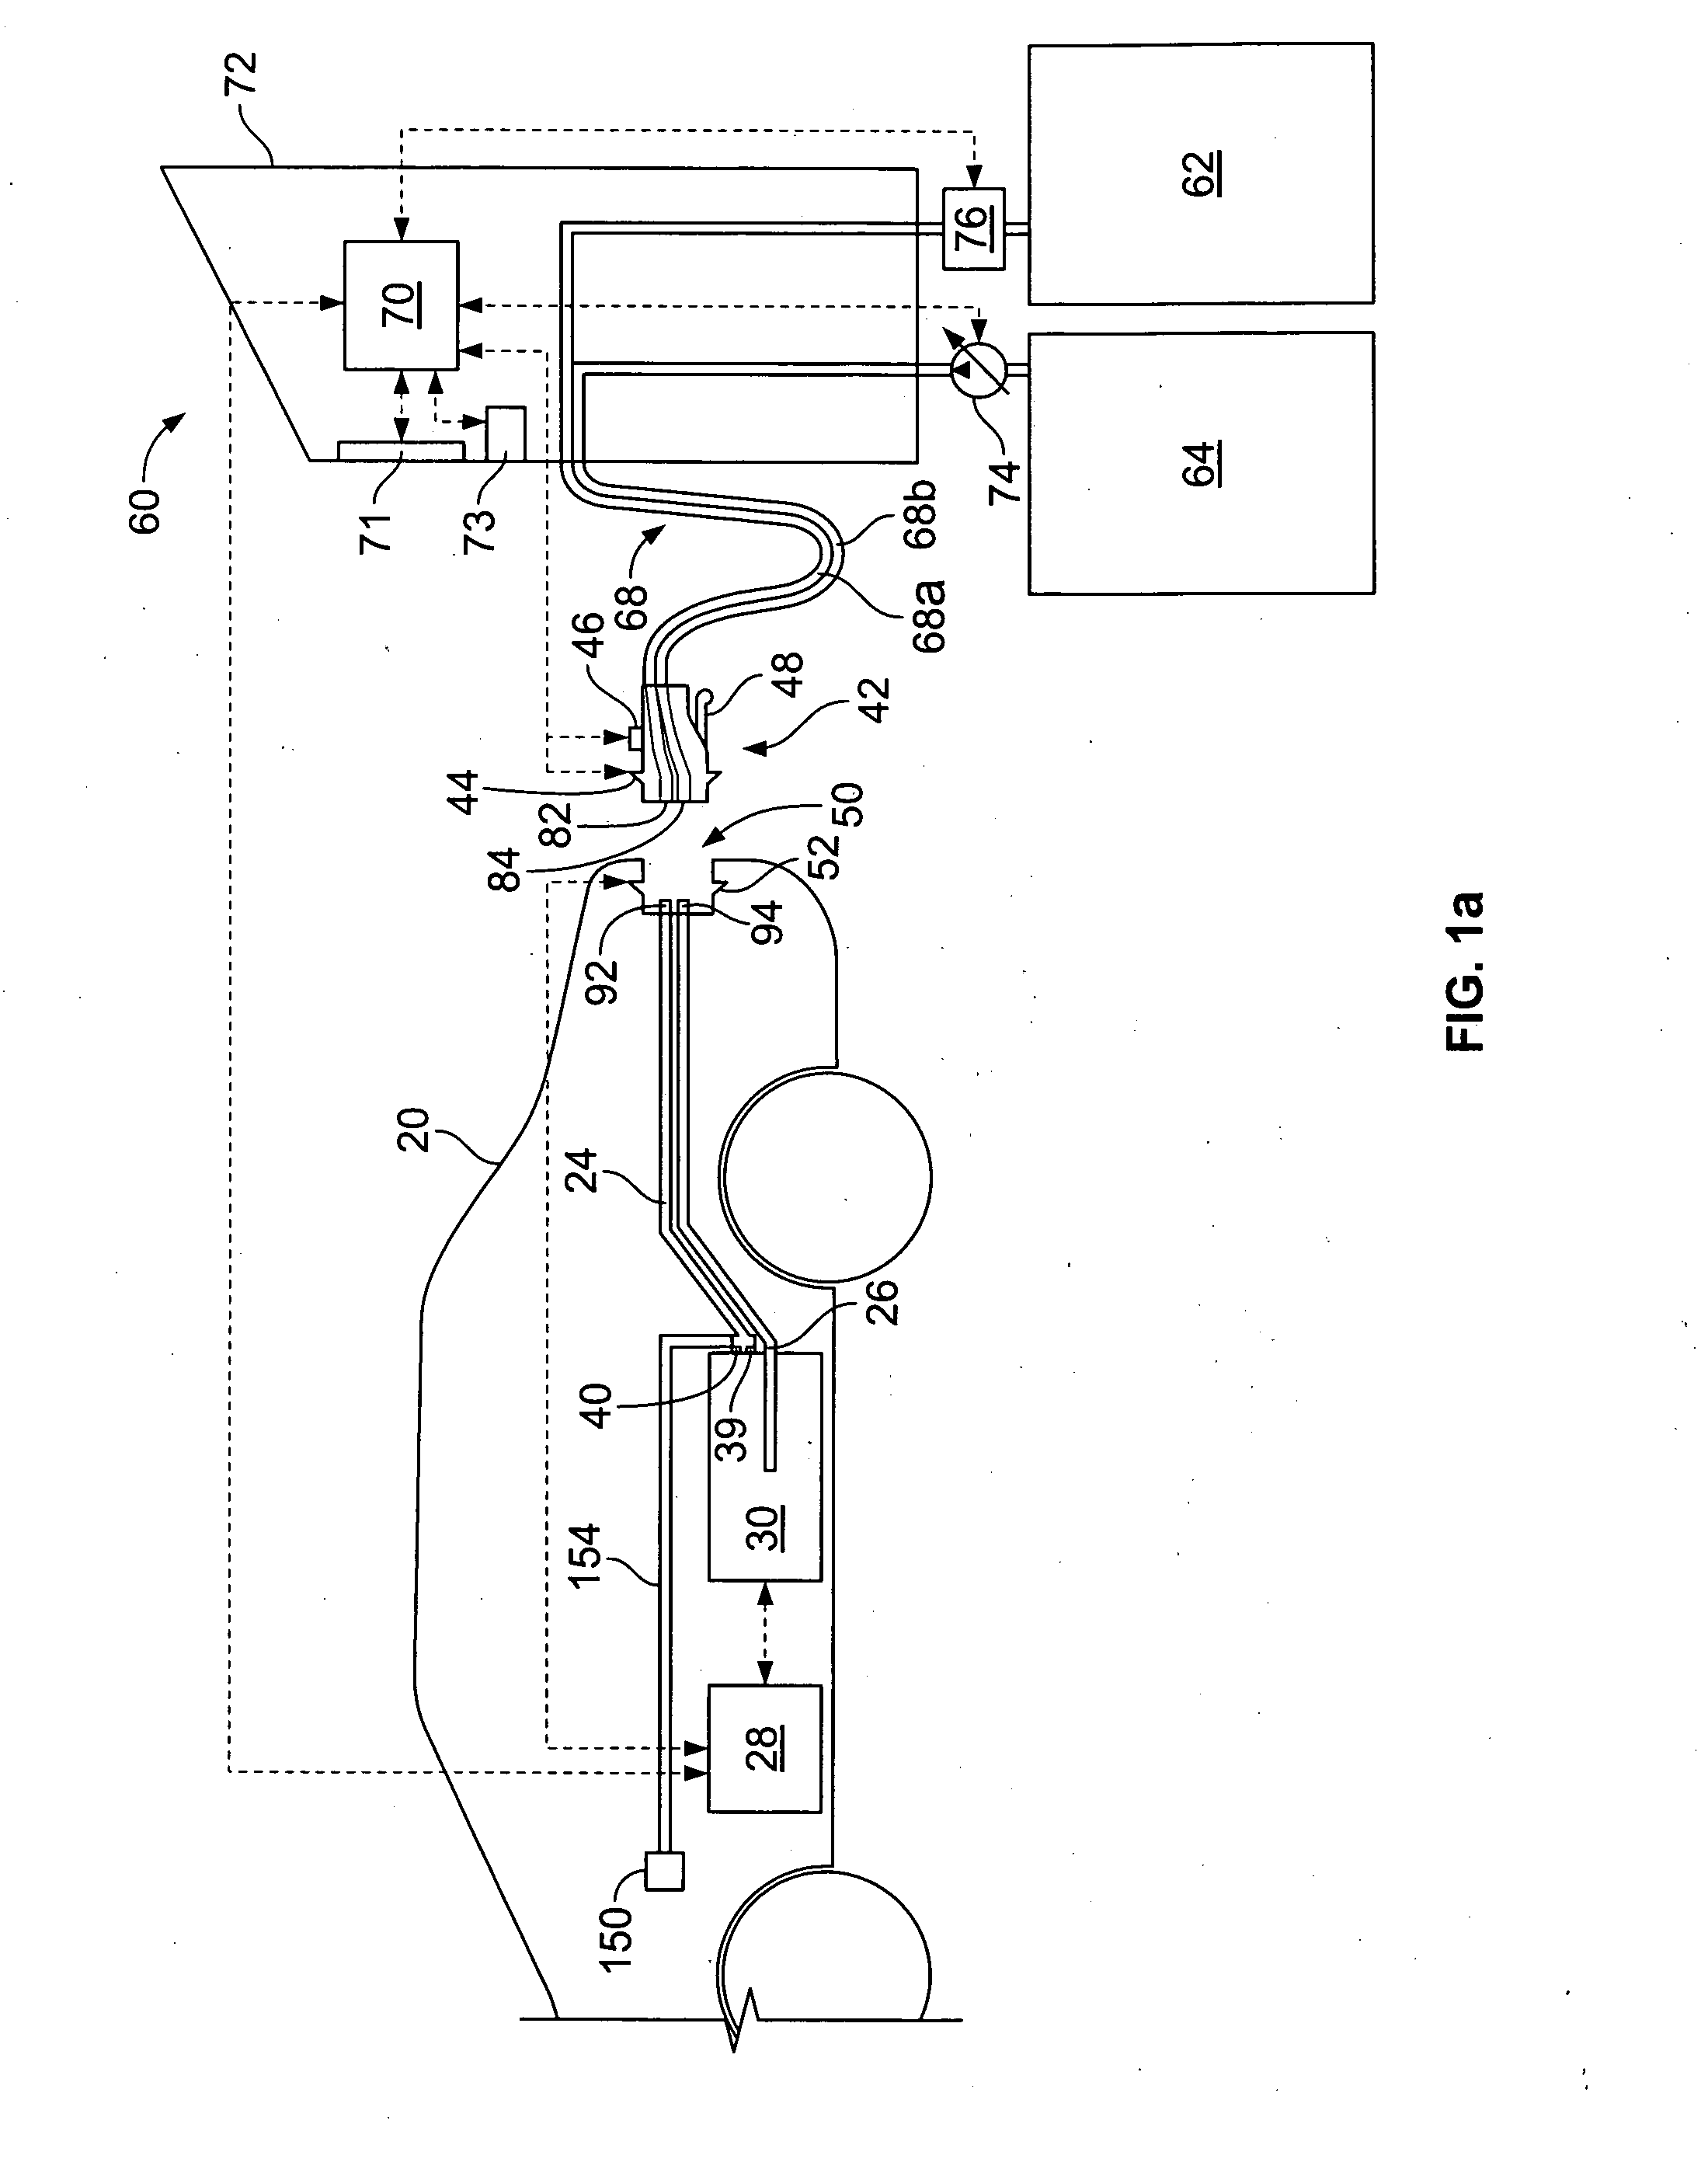 Station for rapidly charging an electric vehicle battery